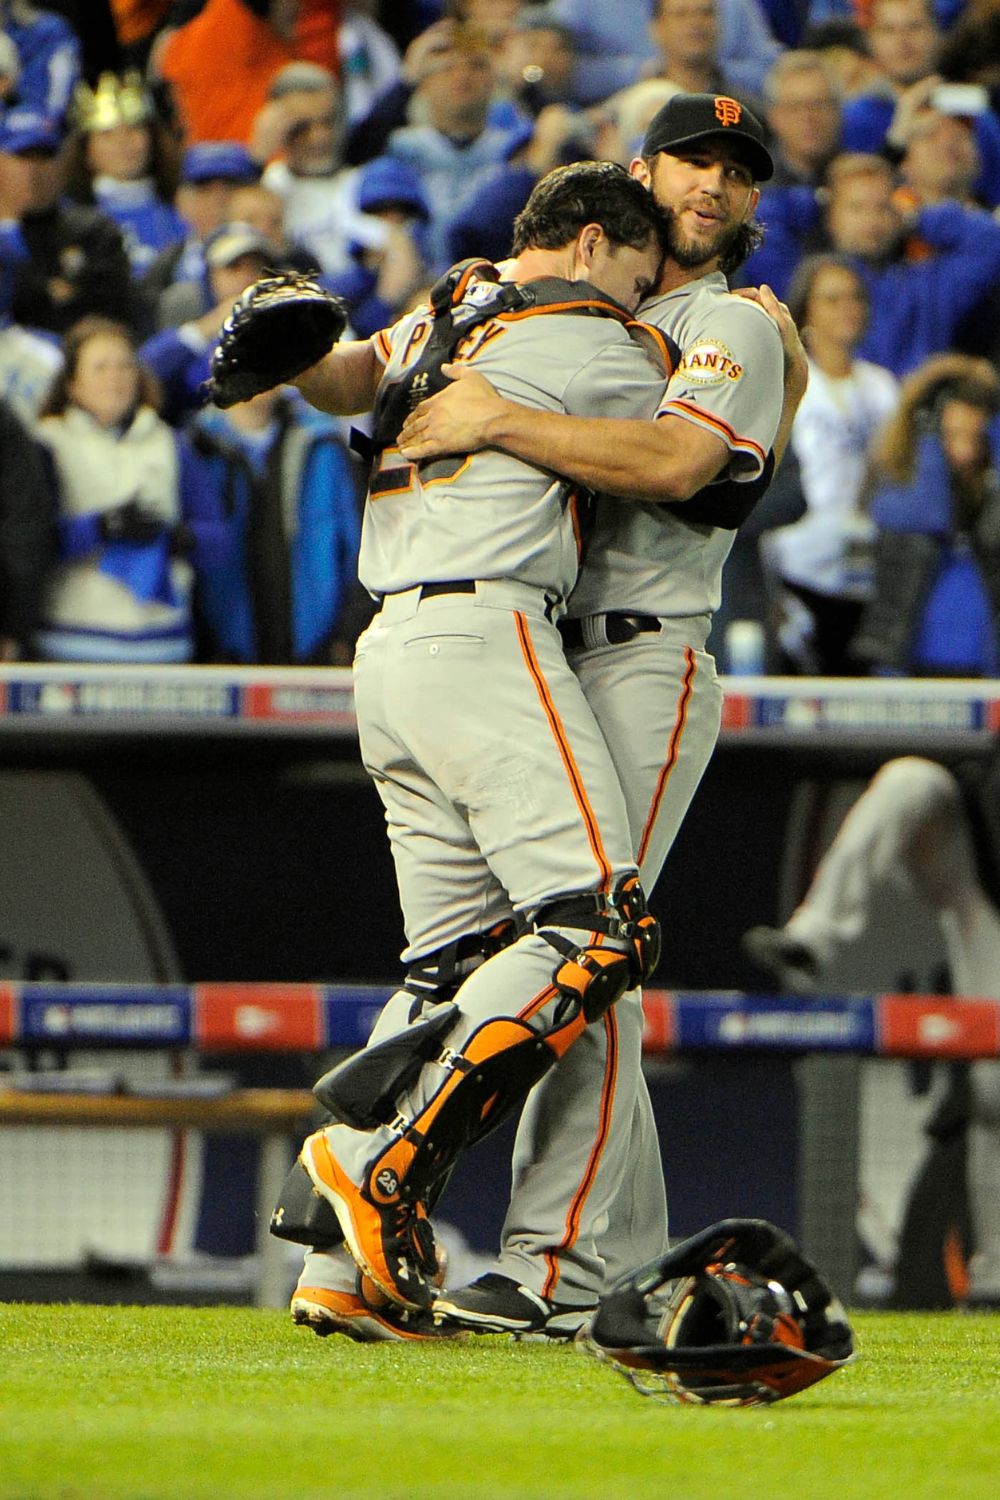 San Francisco Giants Players Hugging Each Other After Their Win